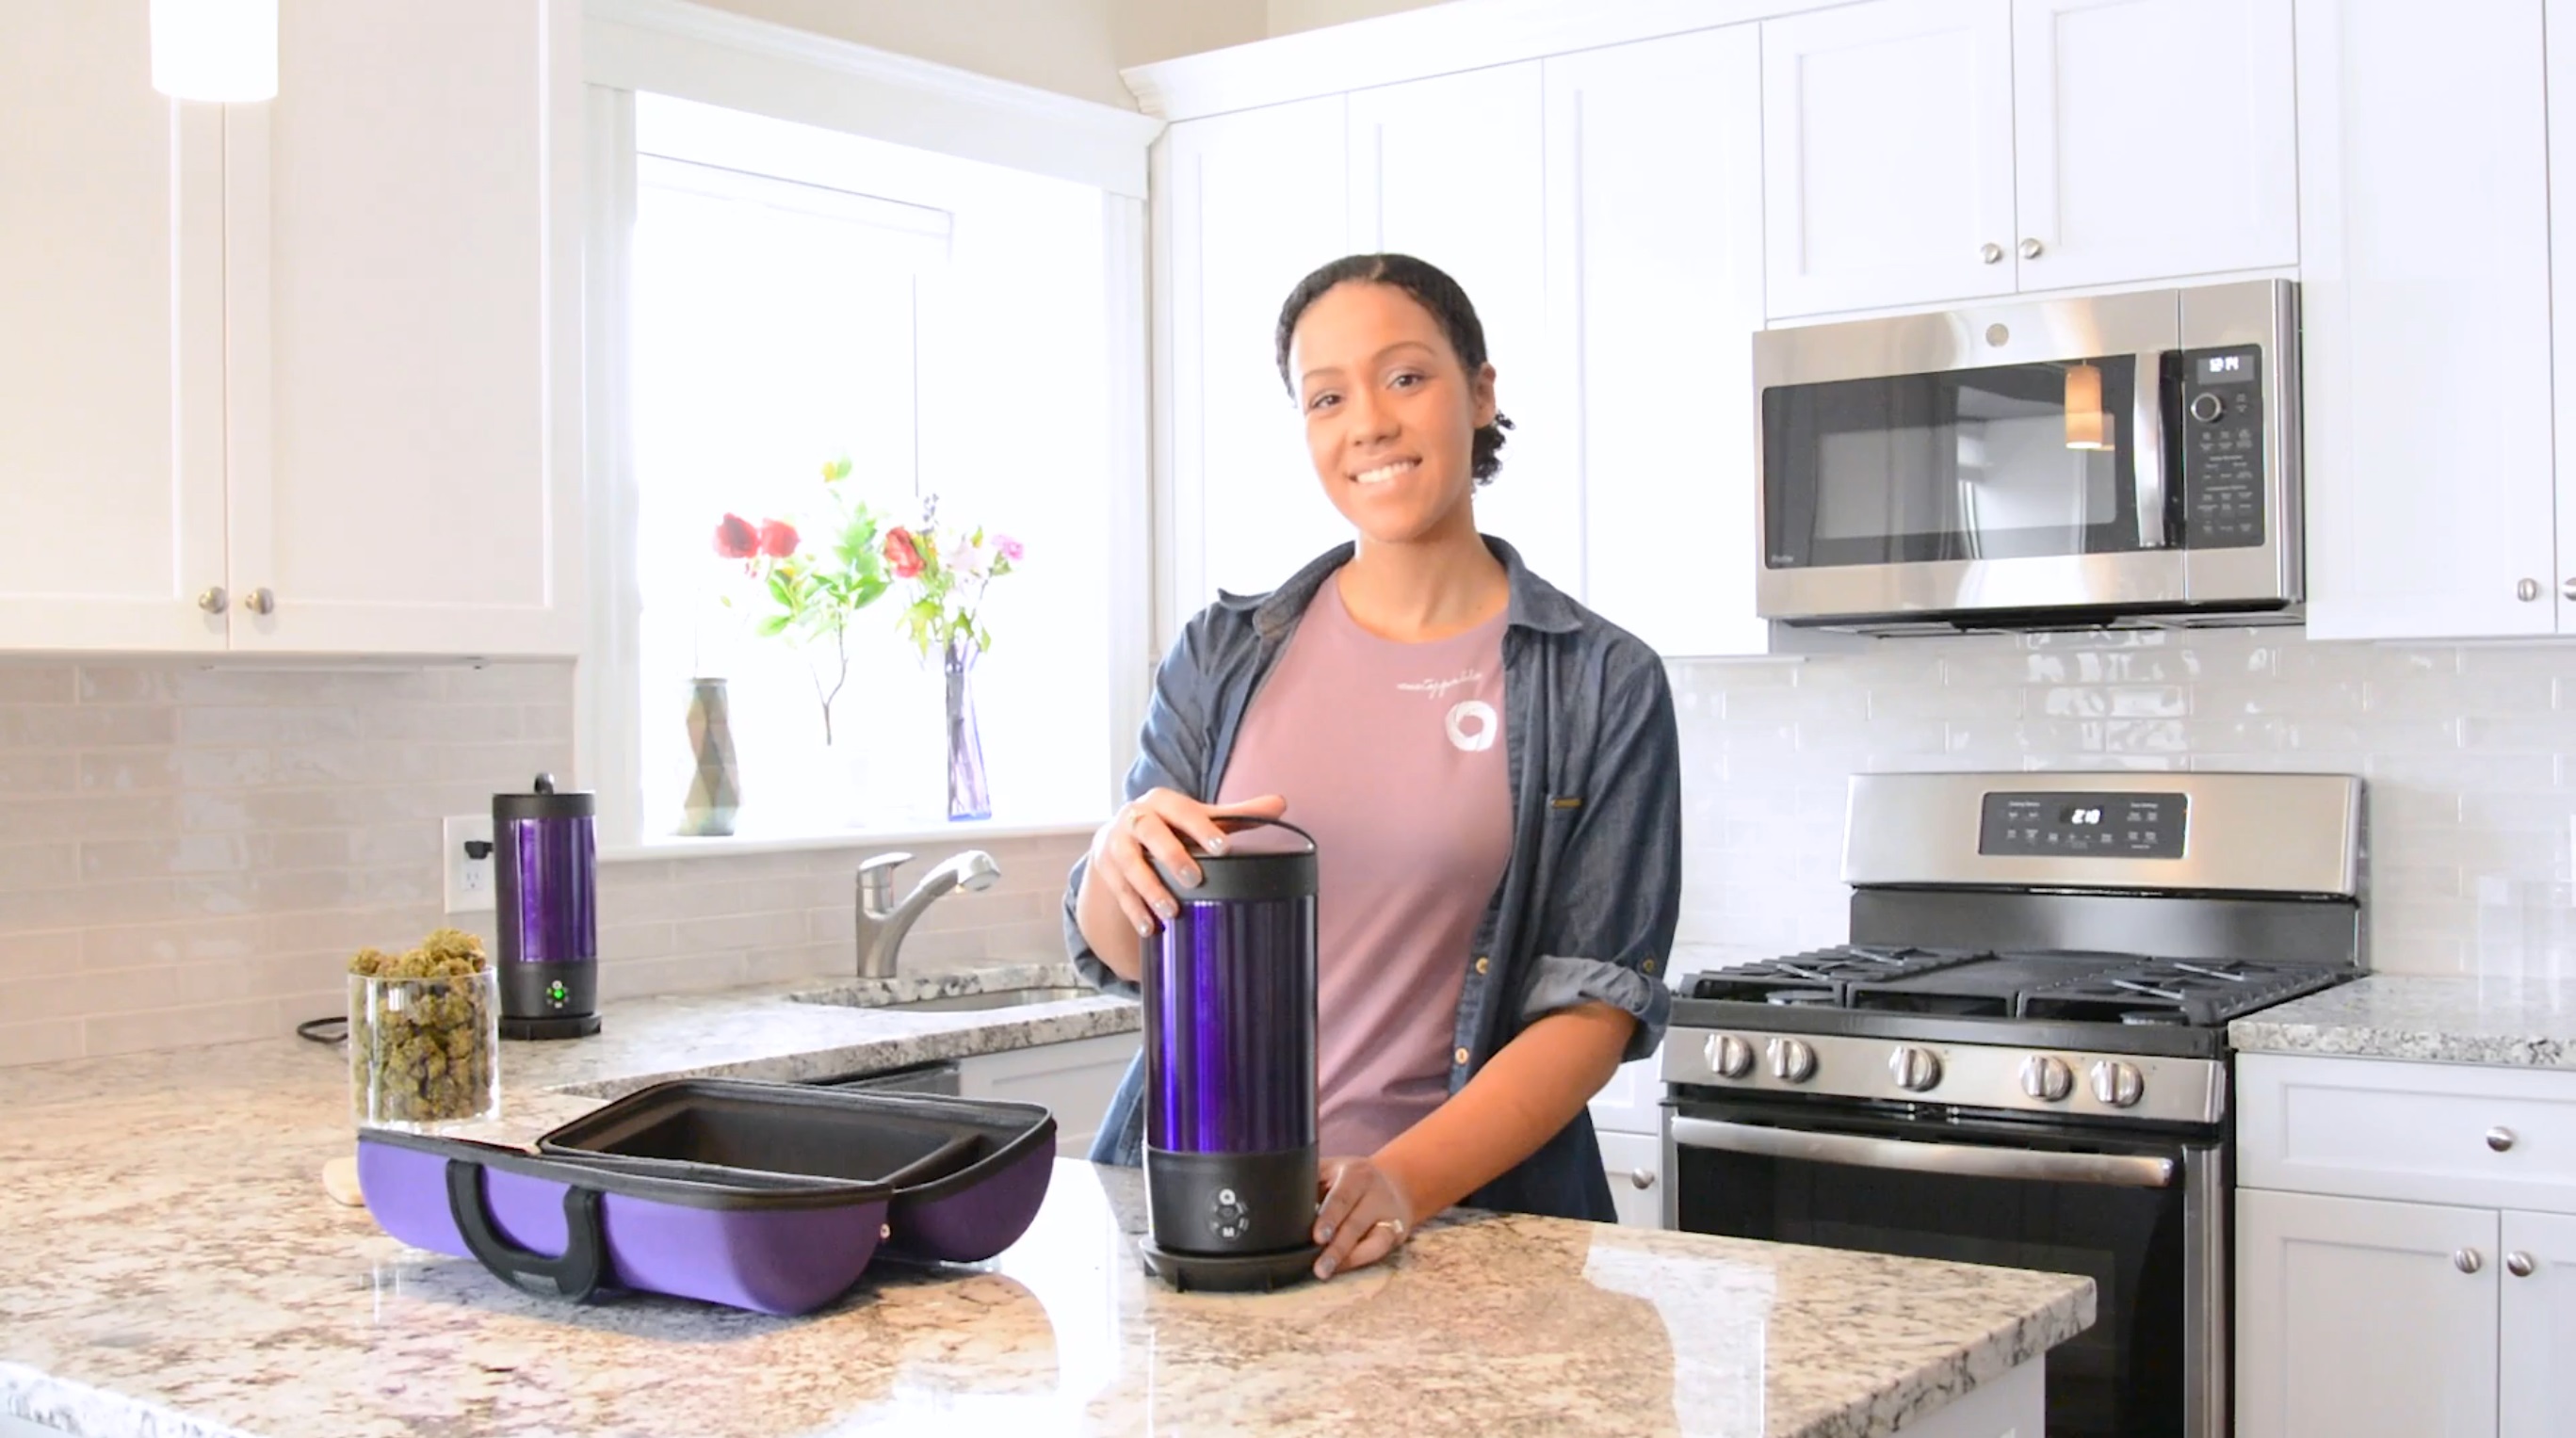 Shanel Lindsay’s “weed easy bake oven” makes it a breeze to create edibles at home